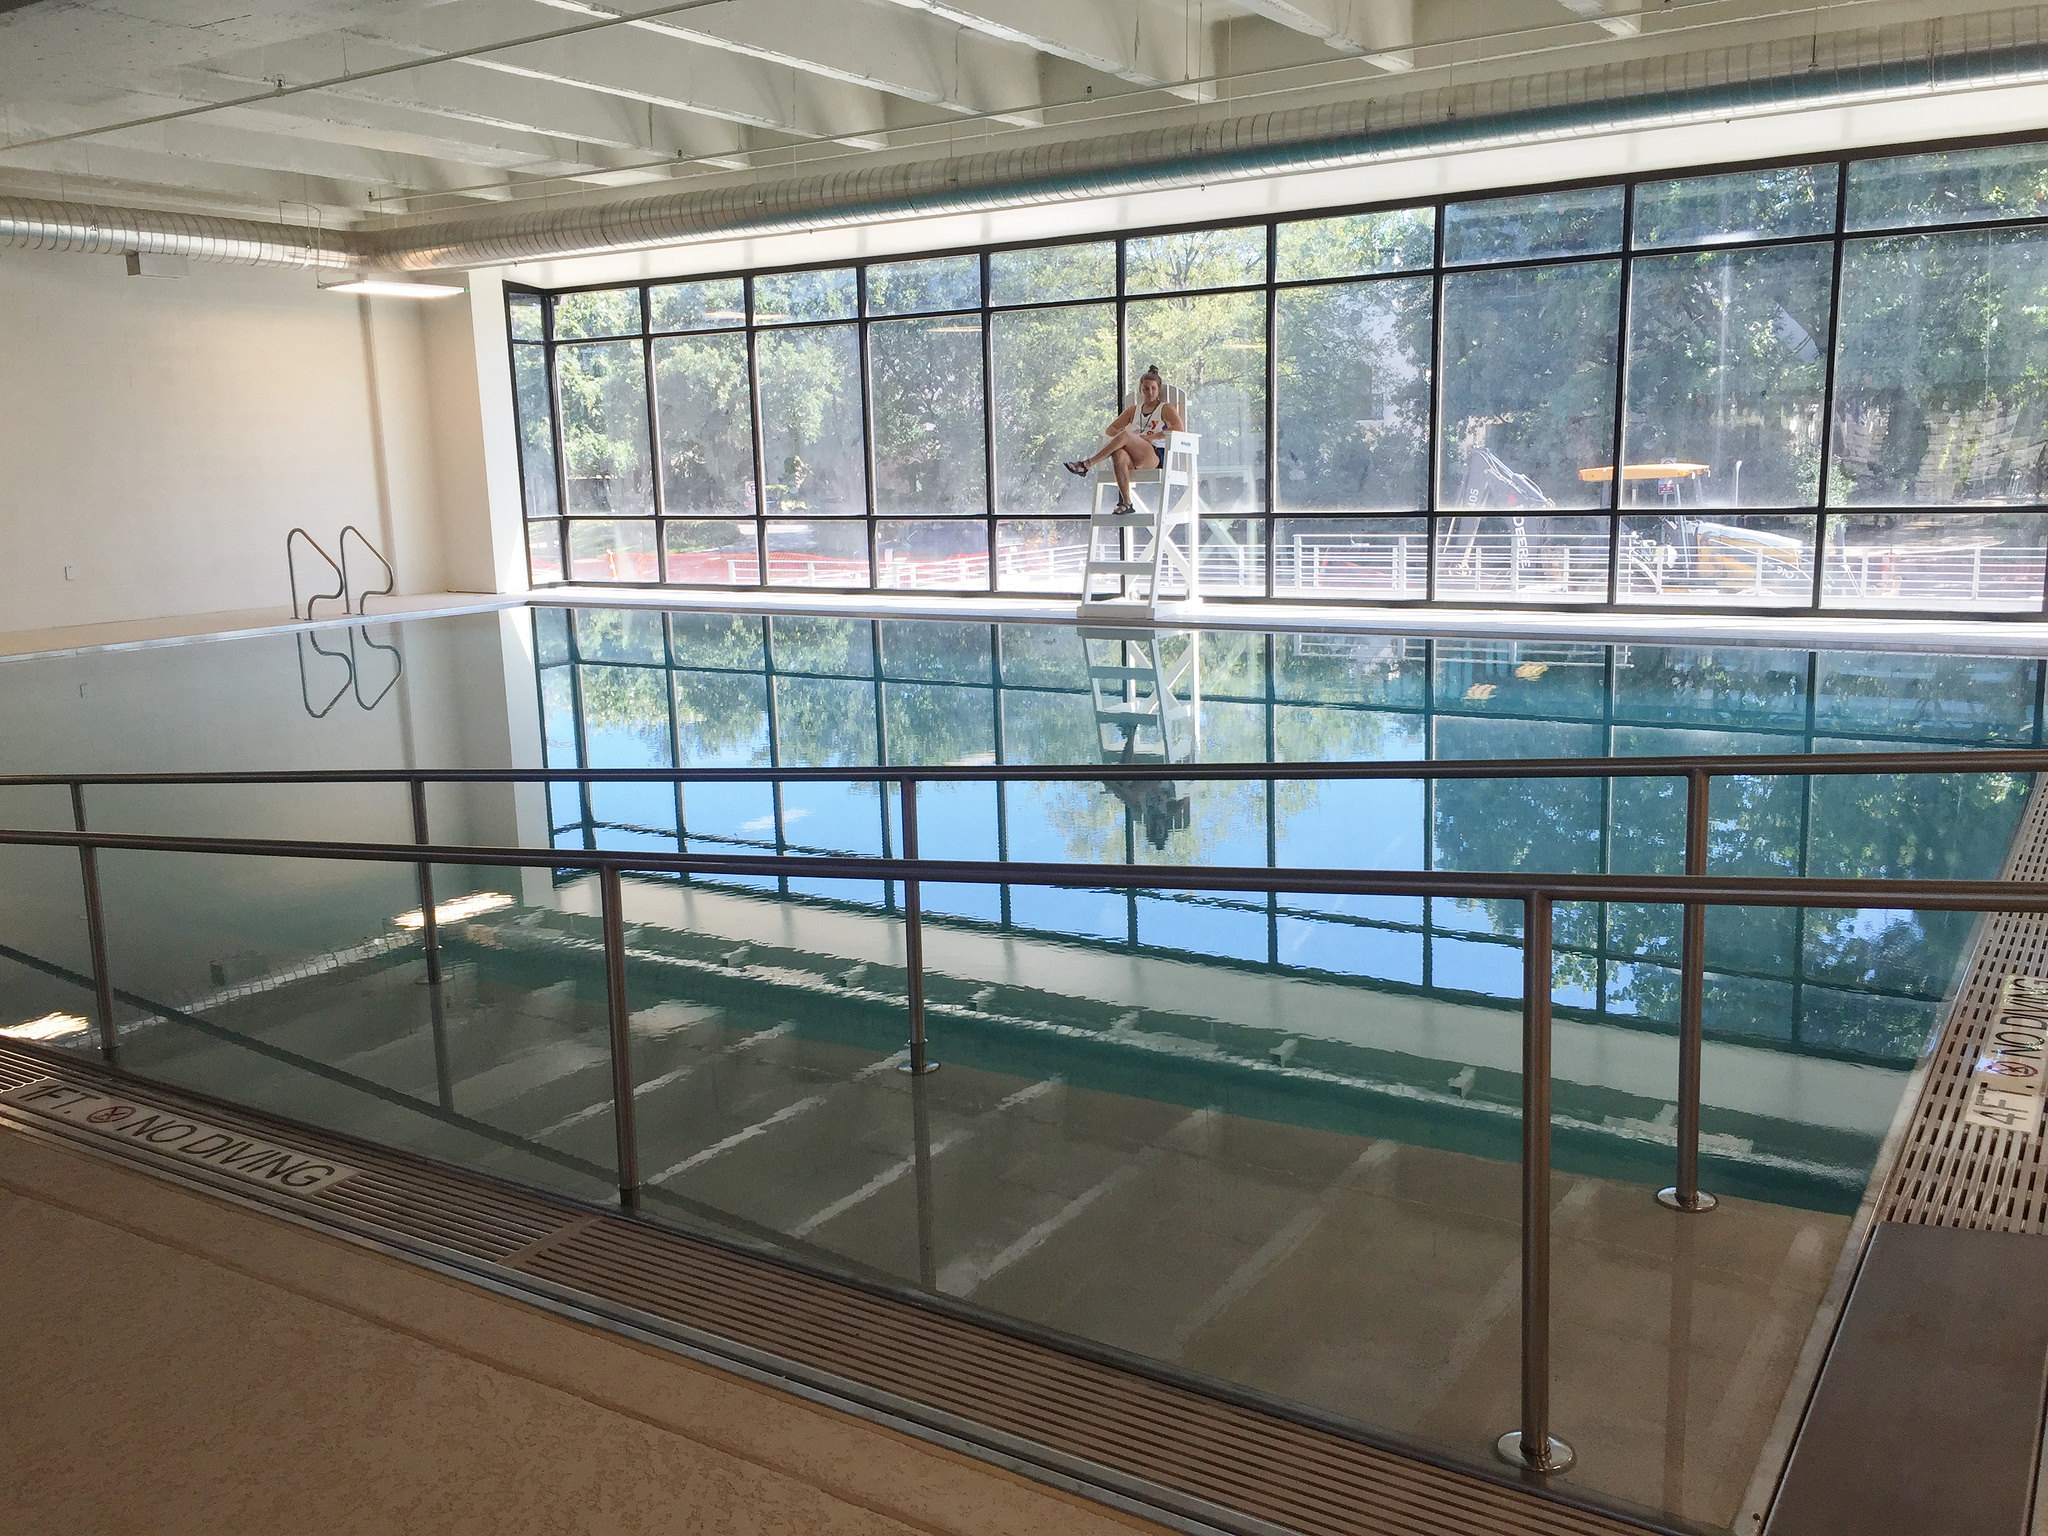 The Seay Natatorium houses a 25-lane pool and a therapy pool.